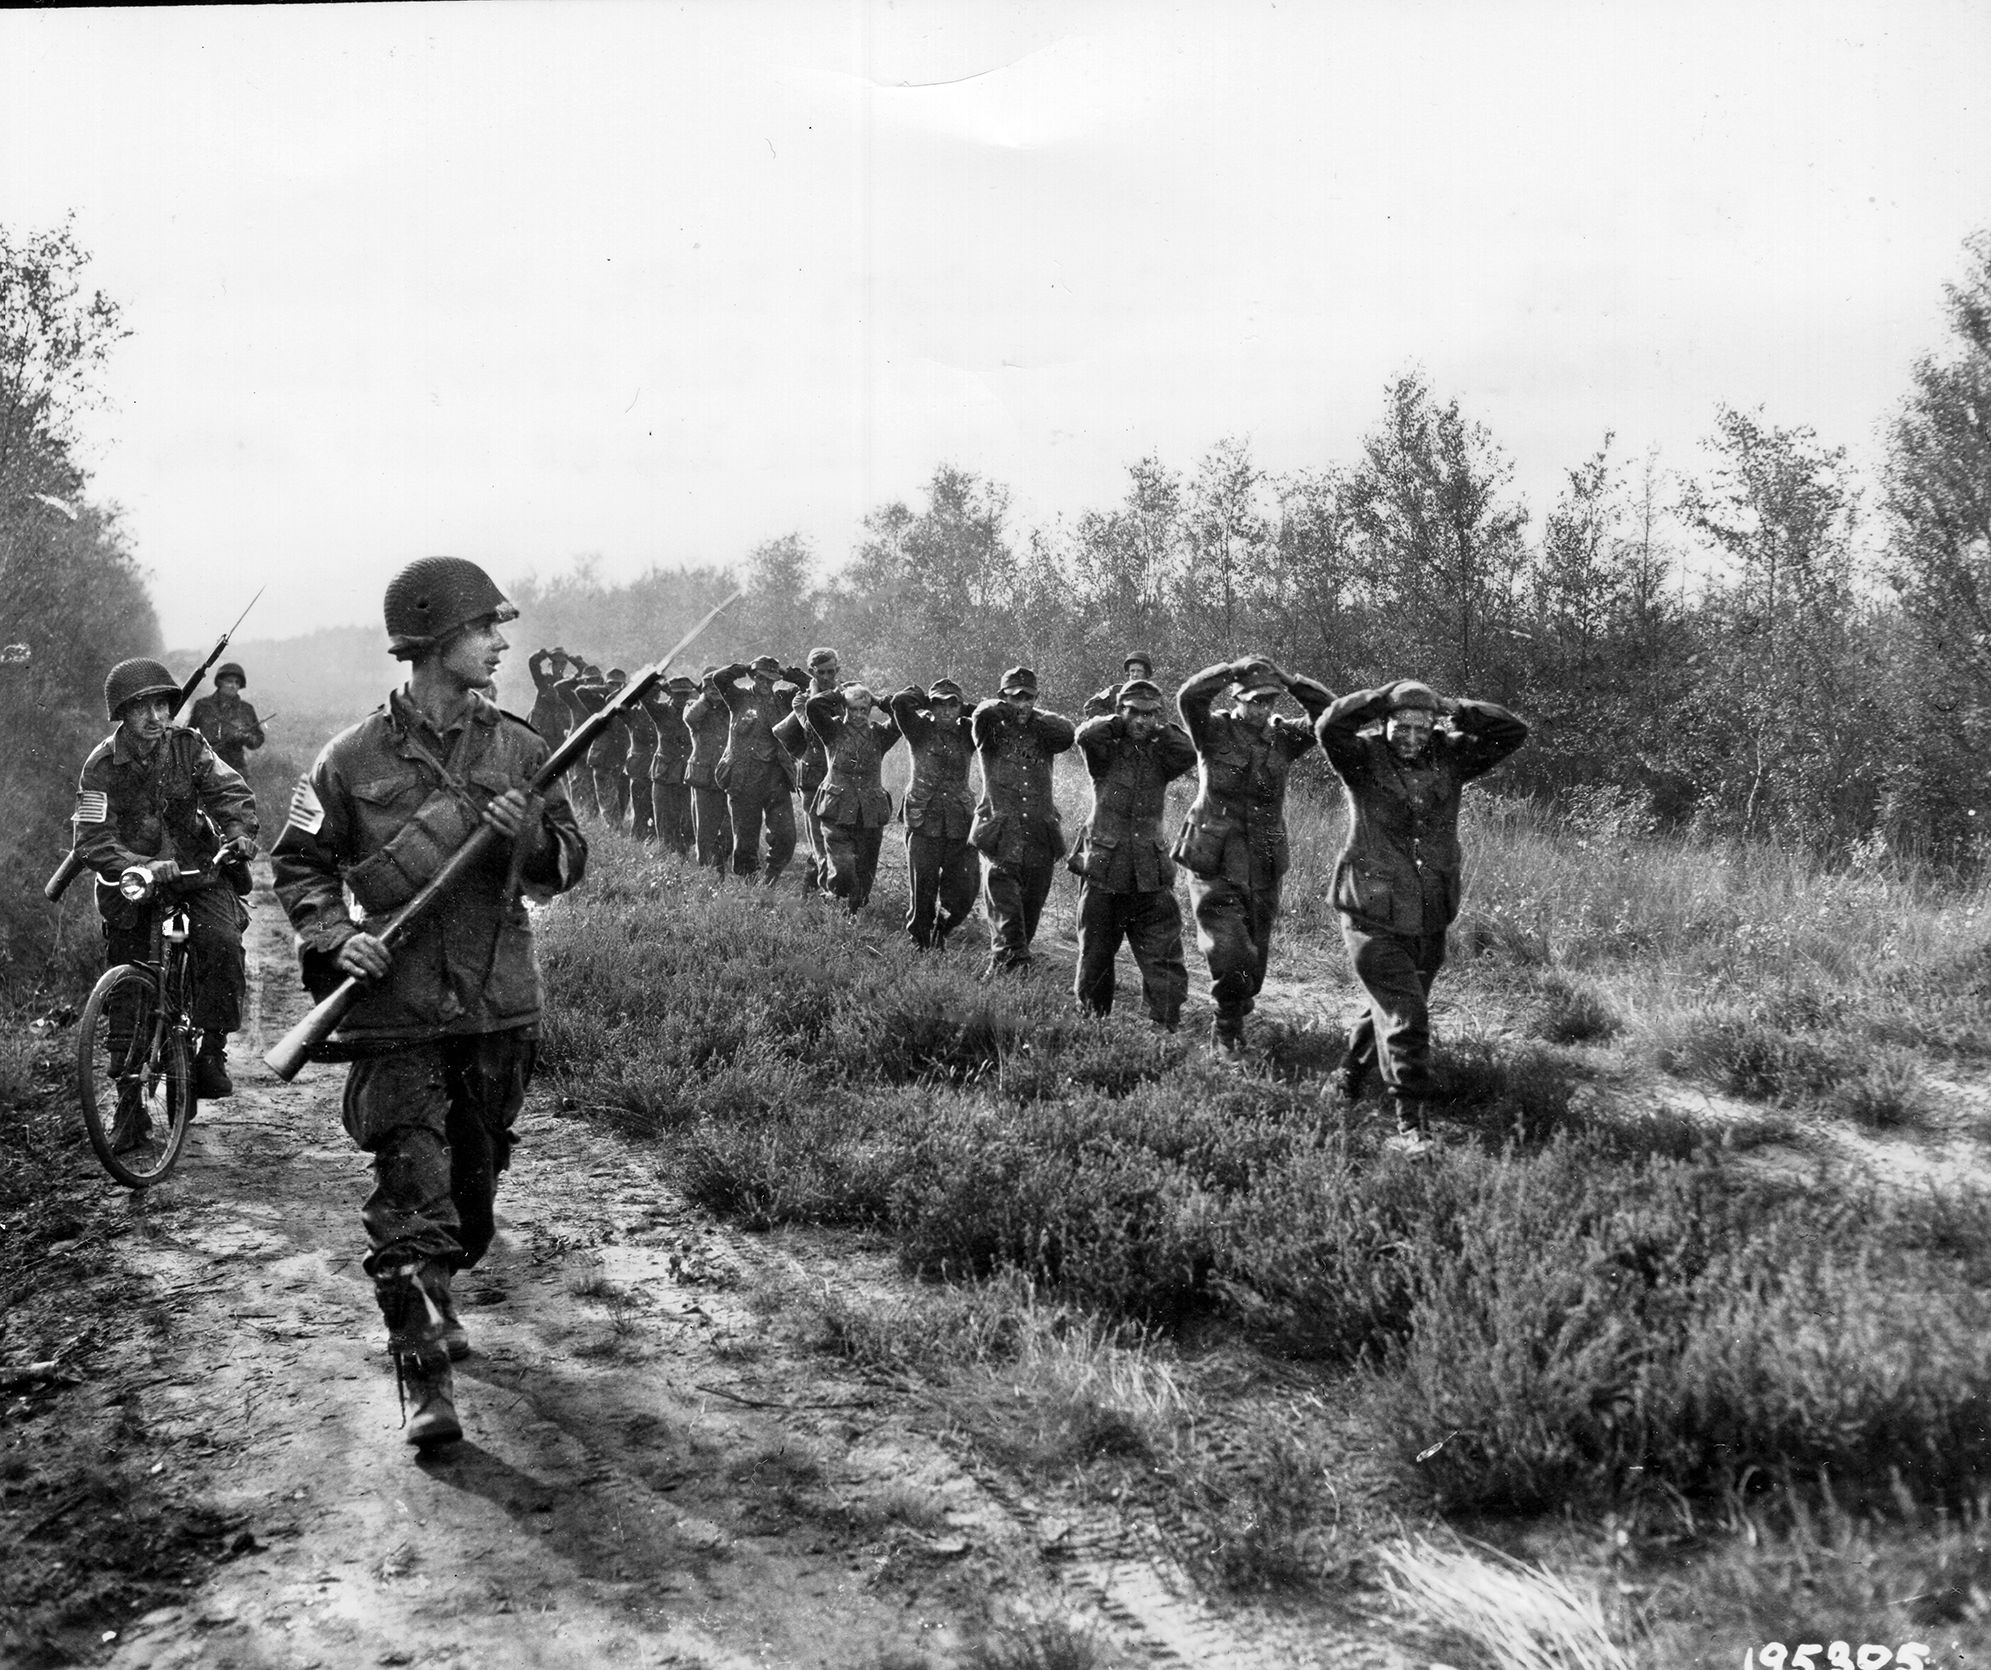 Near the Dutch town of Zon, American paratroopers guard German prisoners on the way to a collection point on September 19, 1944. 